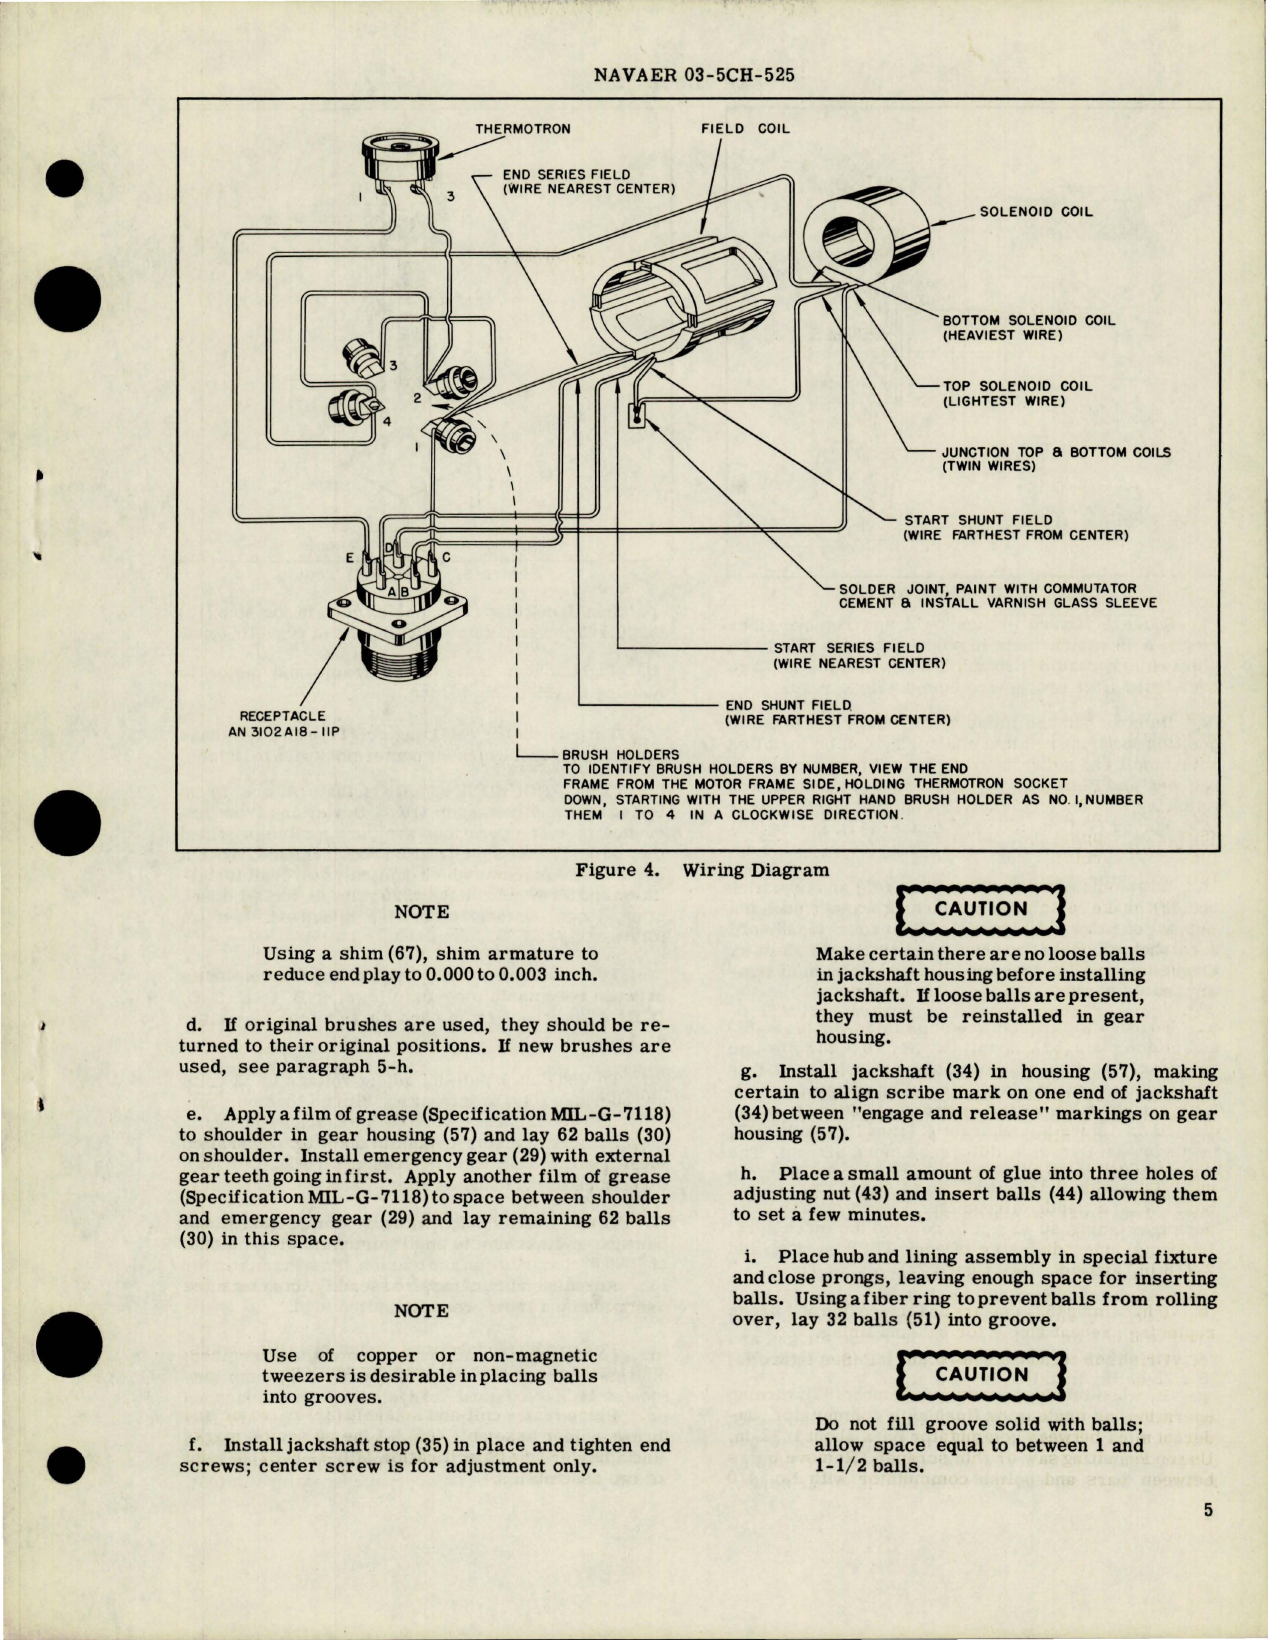 Sample page 5 from AirCorps Library document: Overhaul Instructions with Parts Breakdown for Actuator - Model A7618-4 